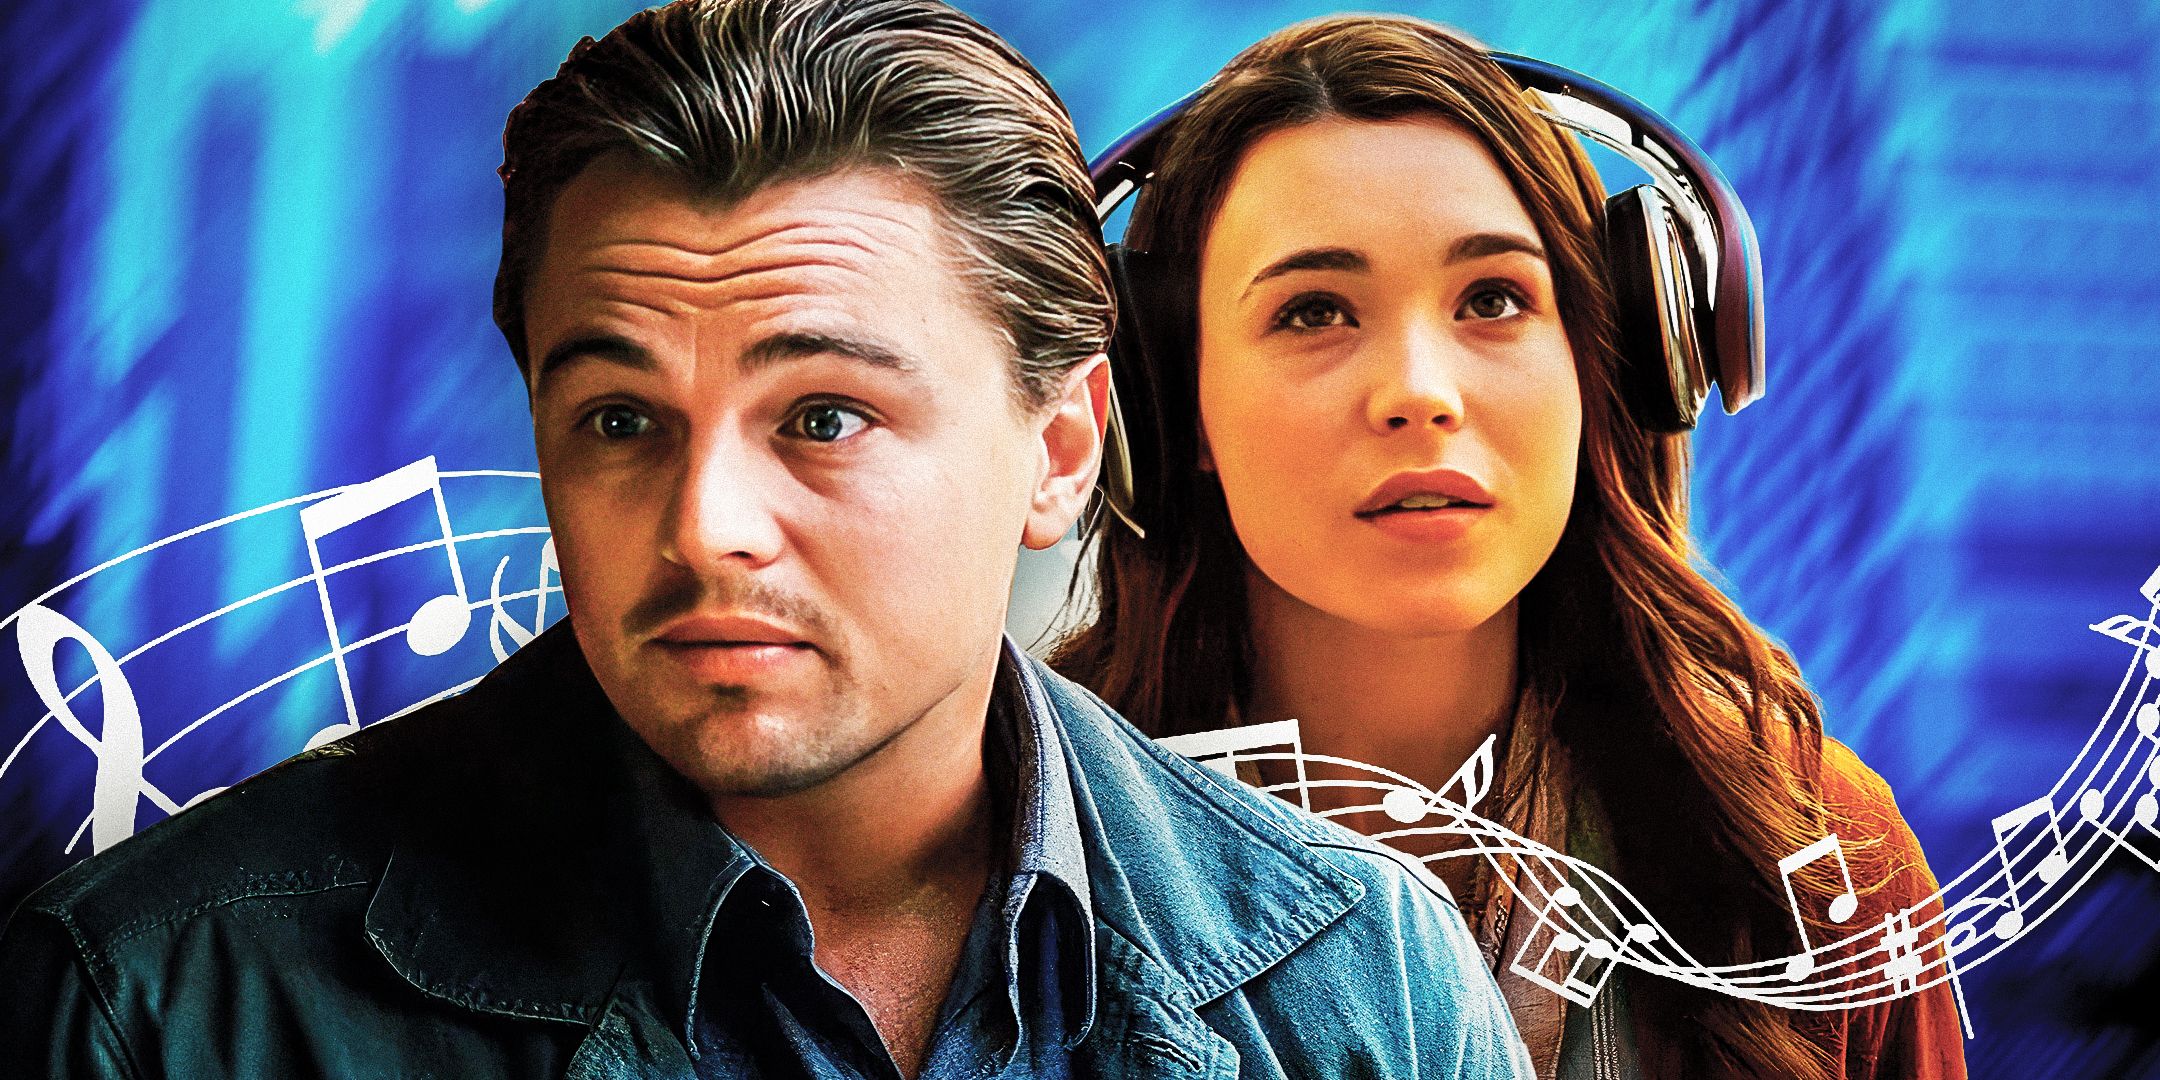 Inception Leonardo DiCaprio as Cobb Elliot Page as Ariadne with music notes behind them